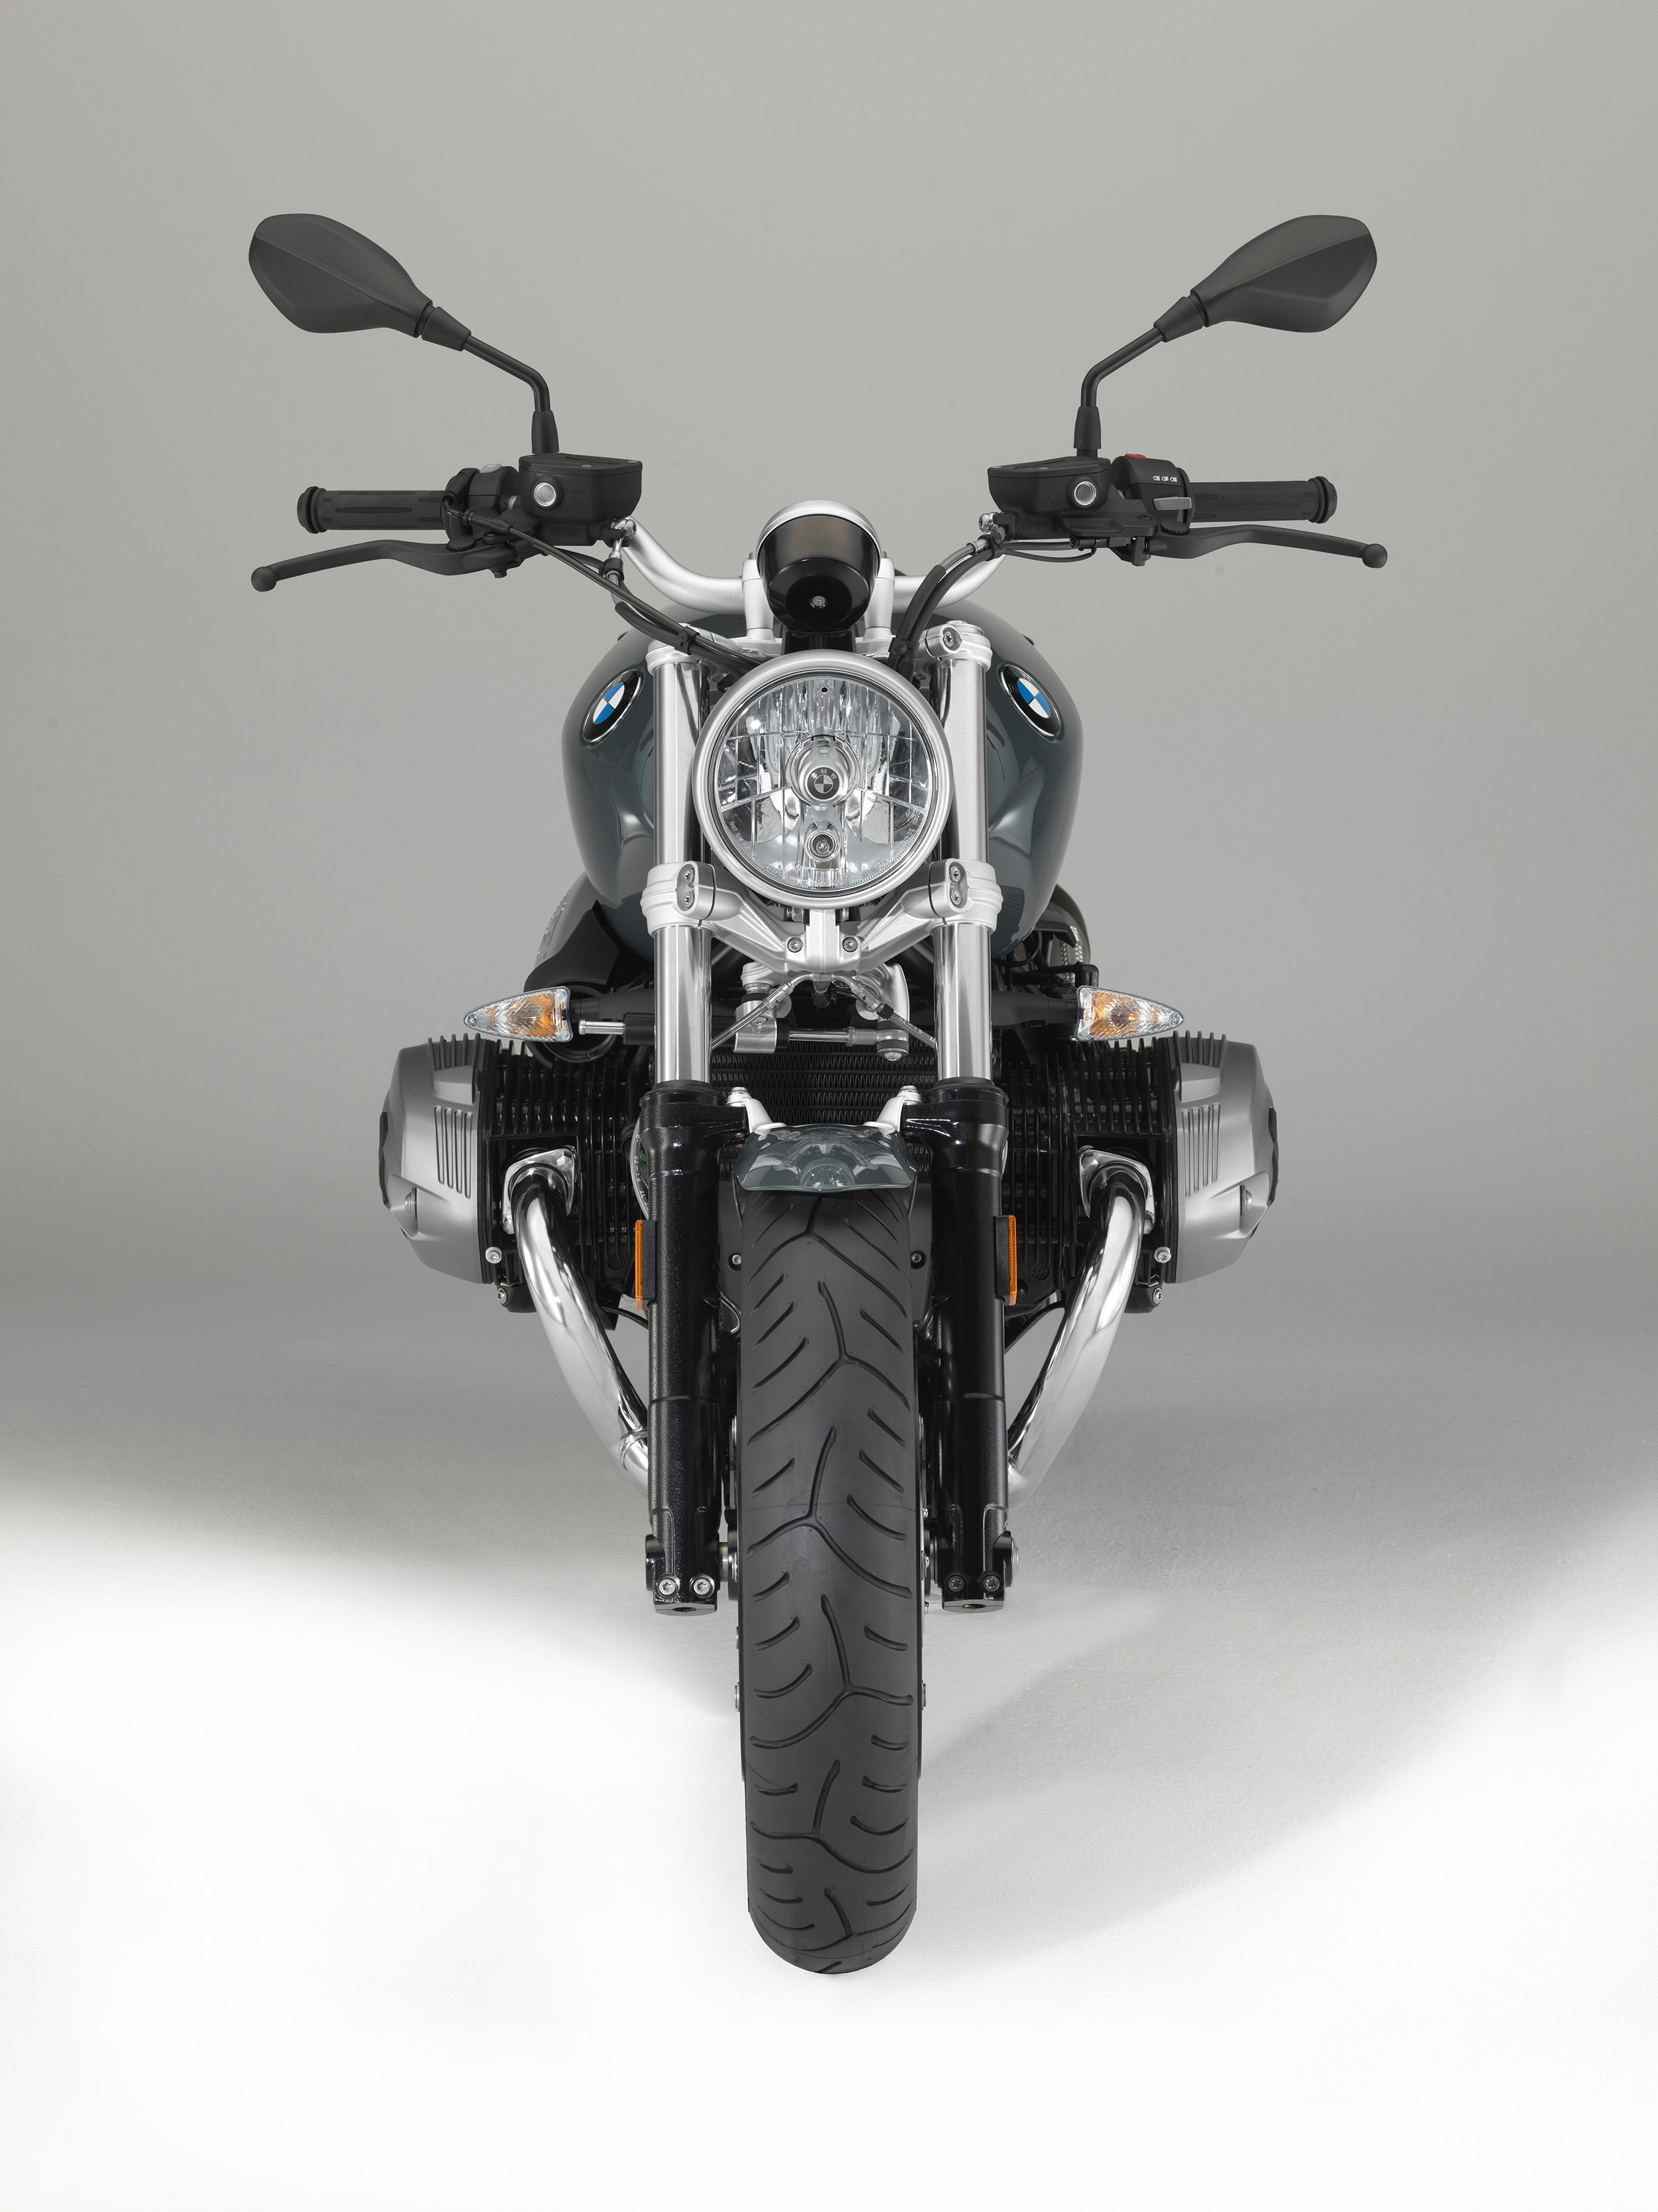 BMW reveals two new members of R nineT family